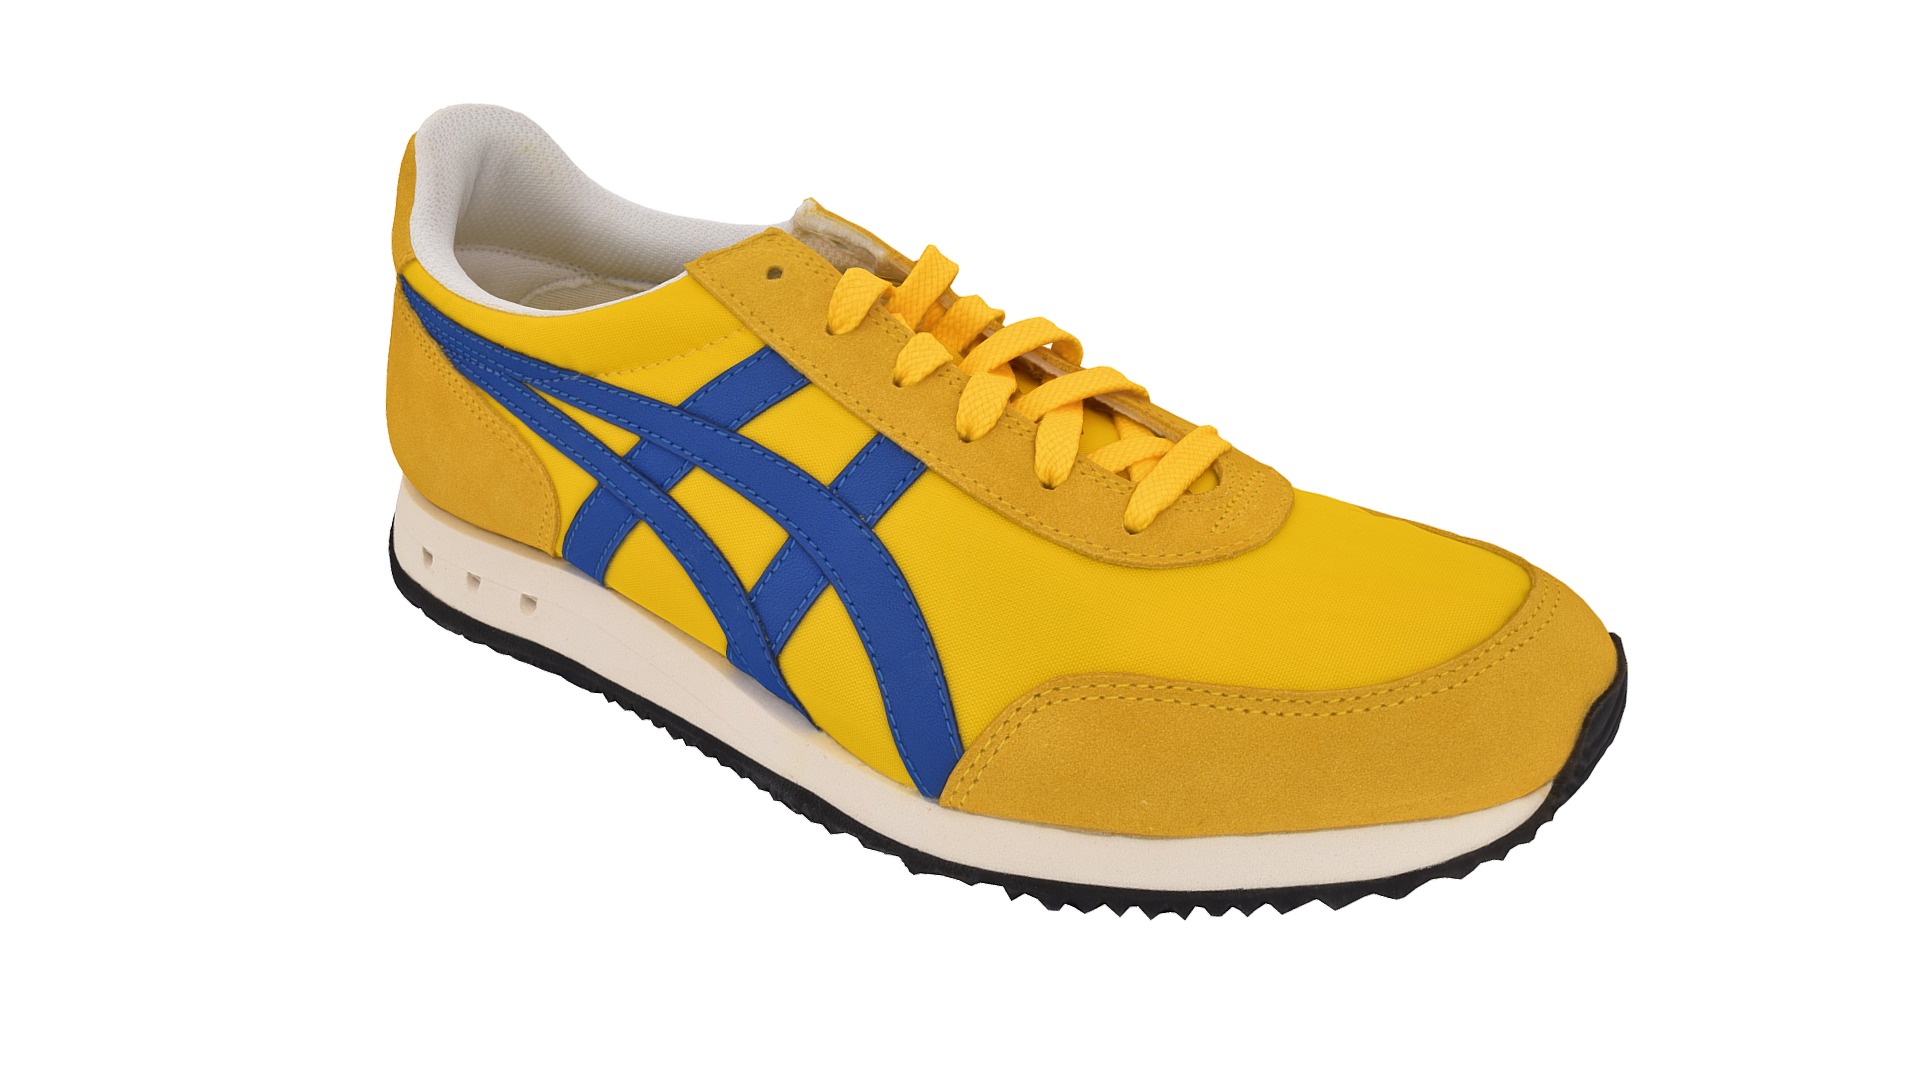 3D model Onitsuka Tiger, model ‘NEW YORK’ - This is a 3D model of the Onitsuka Tiger, model 'NEW YORK'. The 3D model is about a yellow and blue shoe.